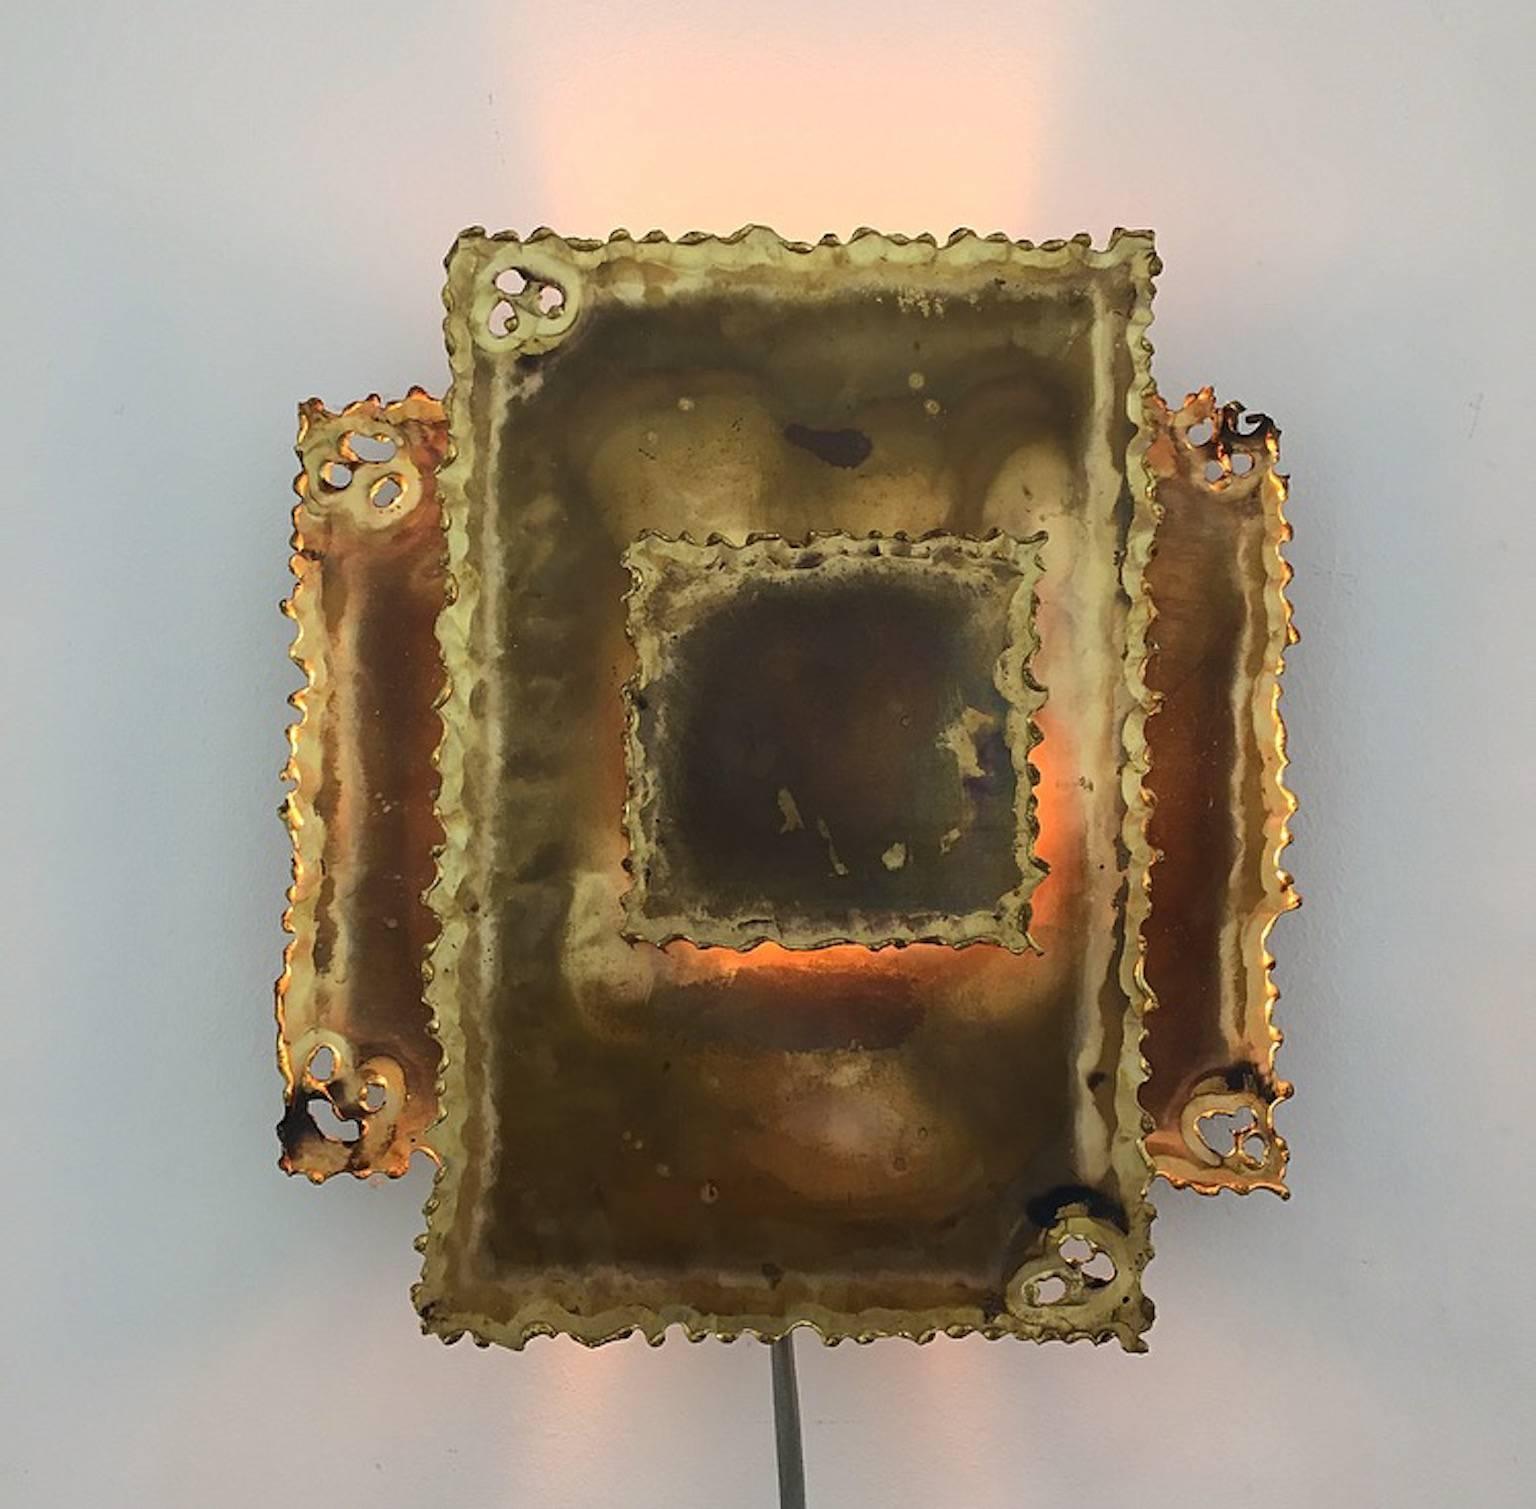 Flame cut wall sconce by Svend Aage Holm Sørensen of Denmark, 1960s.

Condition: Beautiful patinated with very few age related signs.

Light source: E14 Edison screw fitting max 50W. New wiring with 200cm new cord white plastic cord.

Size: (H x W x